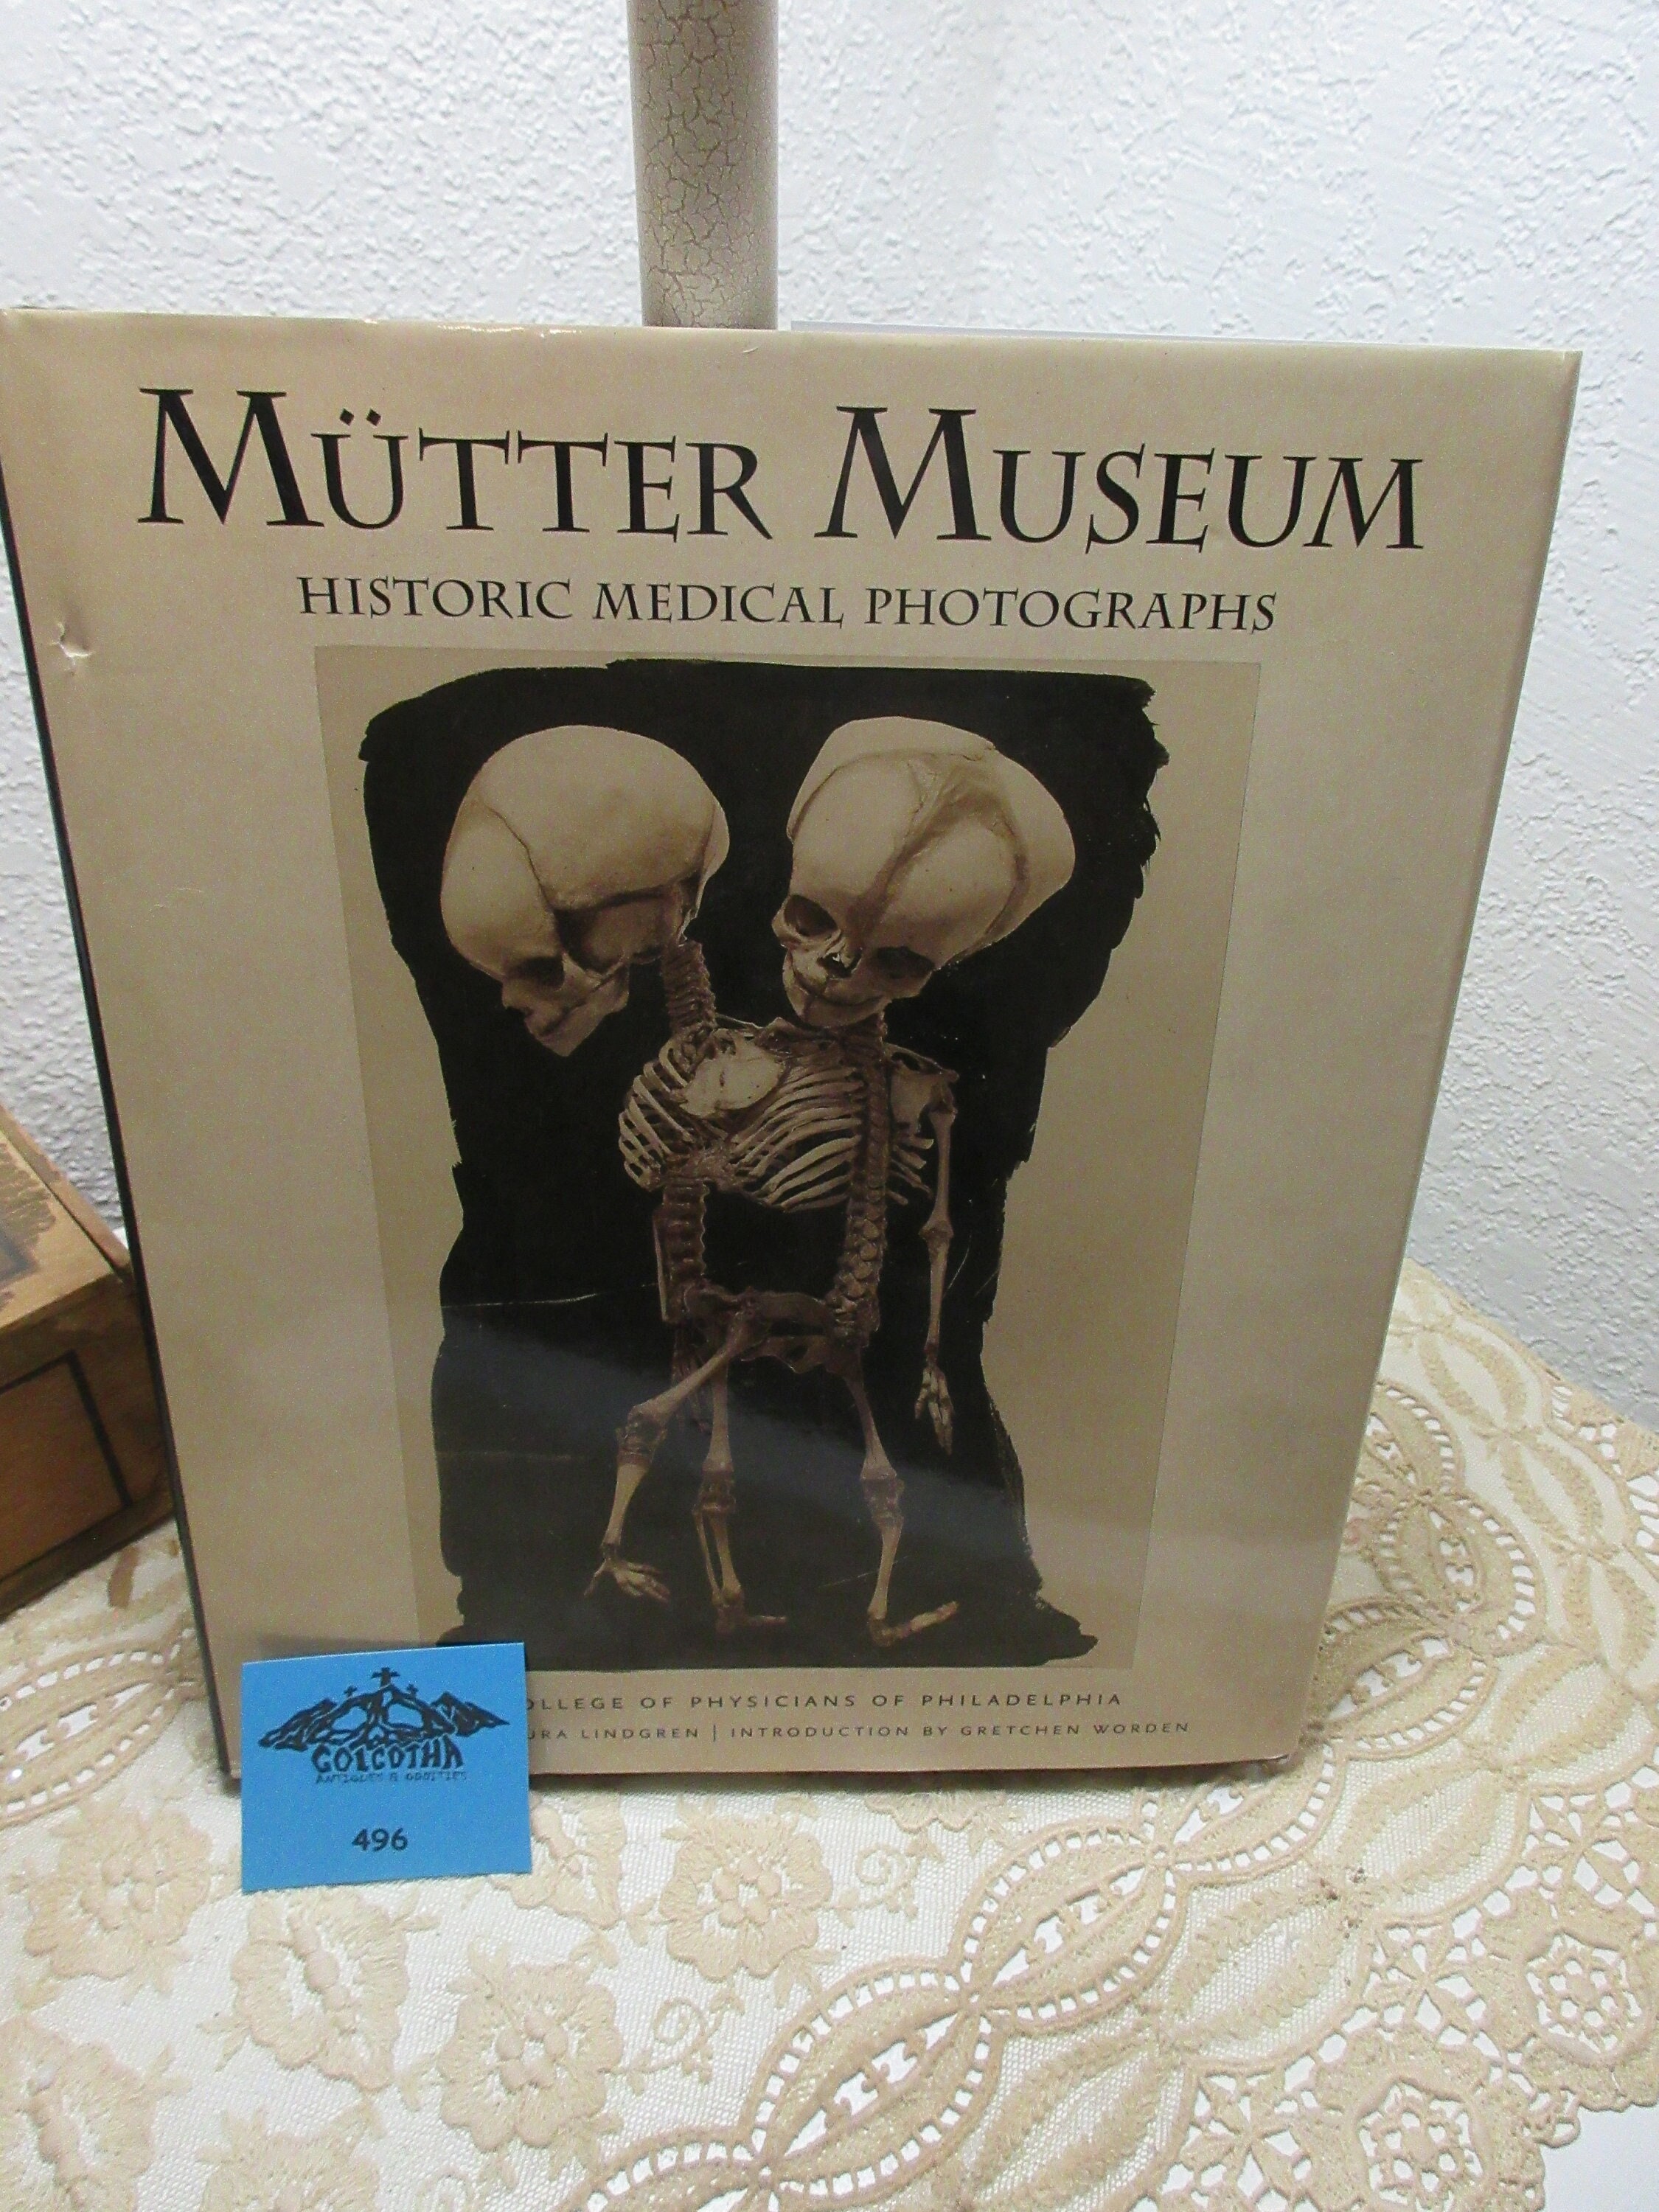 Colored Pencils – Mutter Museum Store